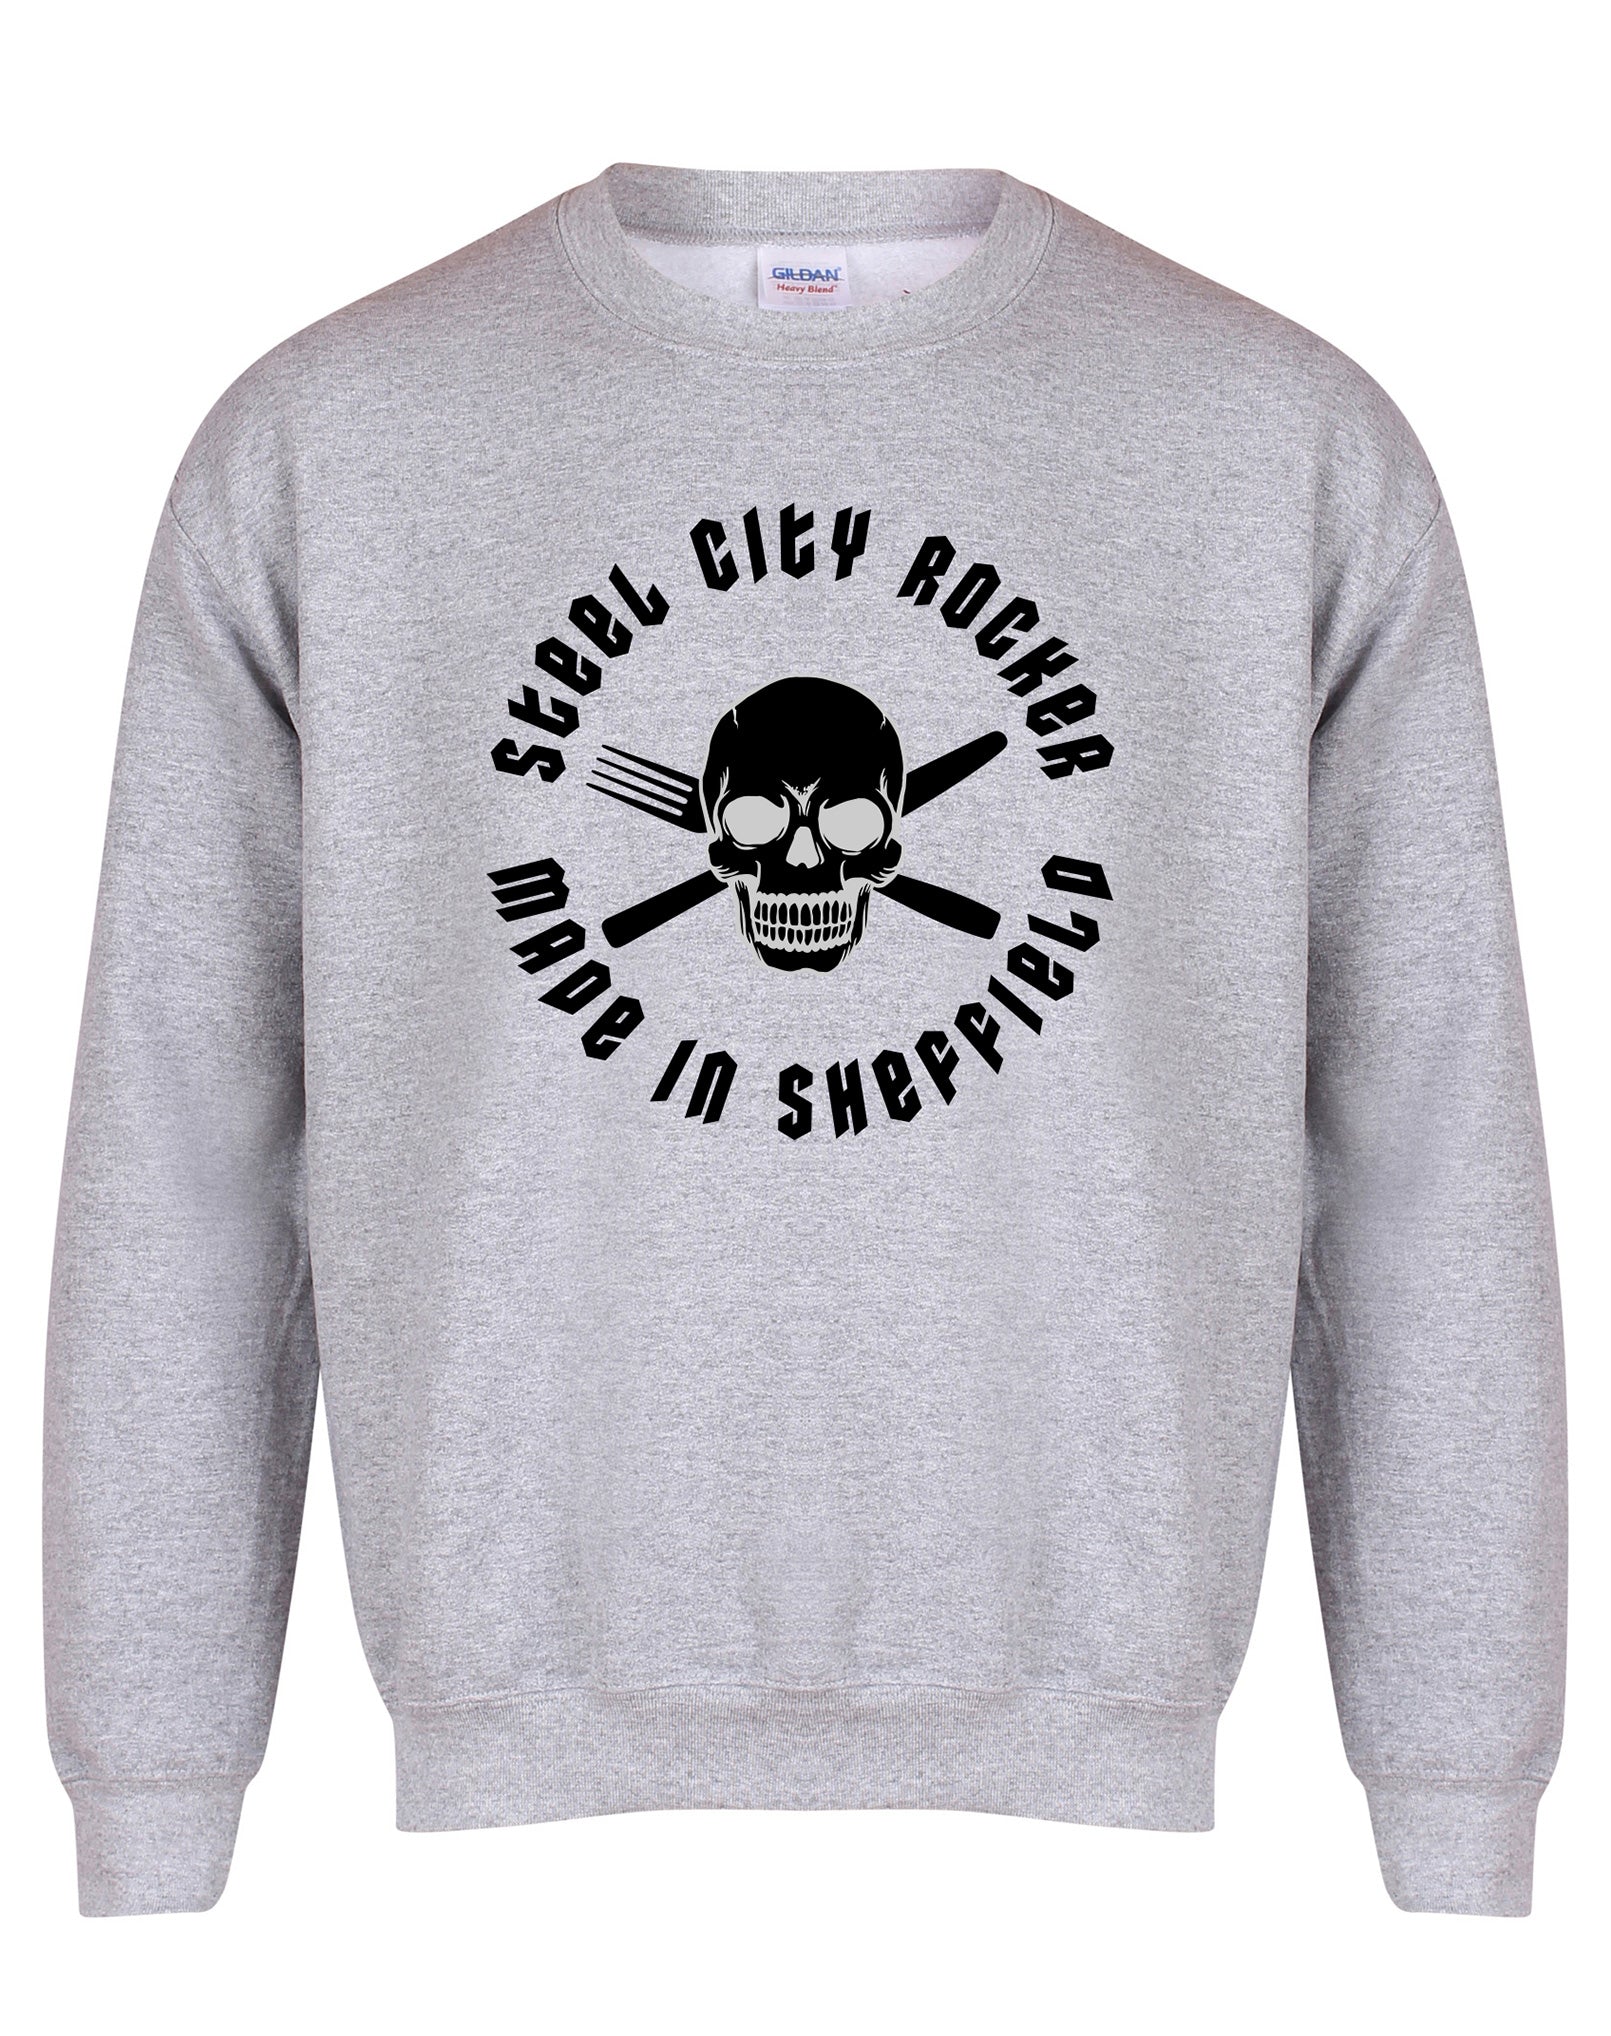 Steel City Rocker - skull and cross-cutlery design - unisex fit sweatshirt - various colours - Dirty Stop Outs